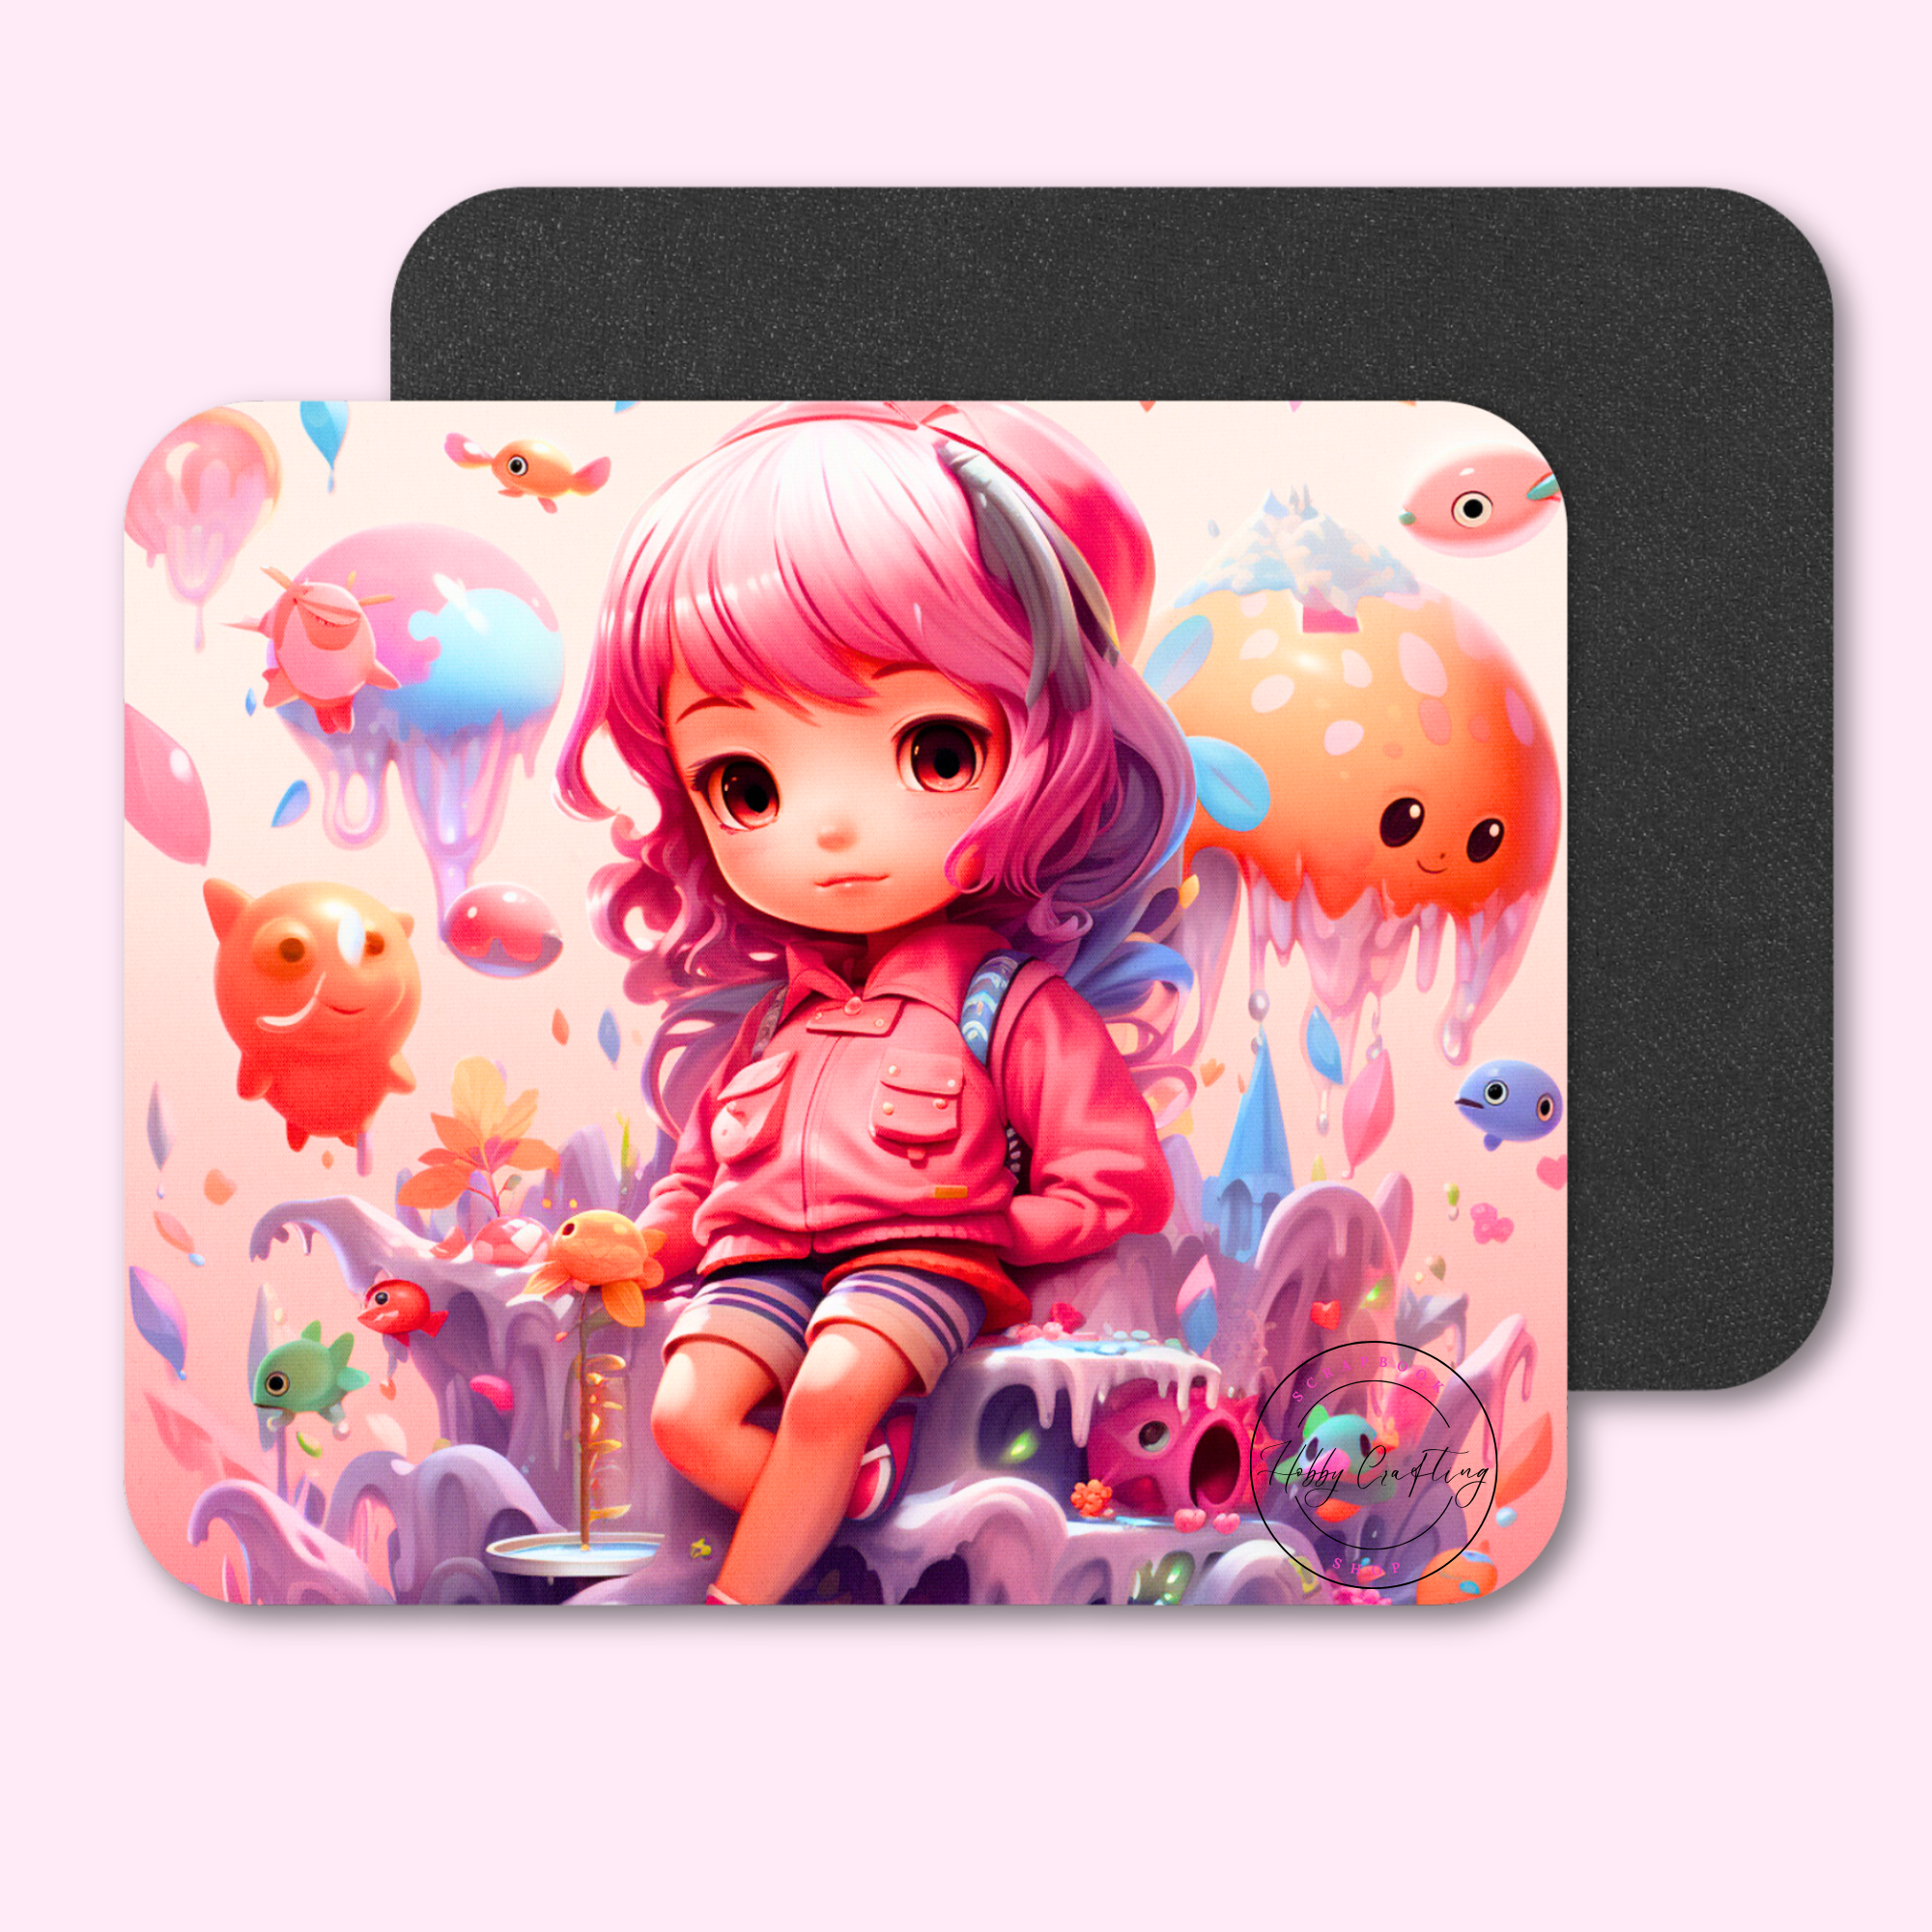 Sublimated Mouse Pad Girls Hair Pink